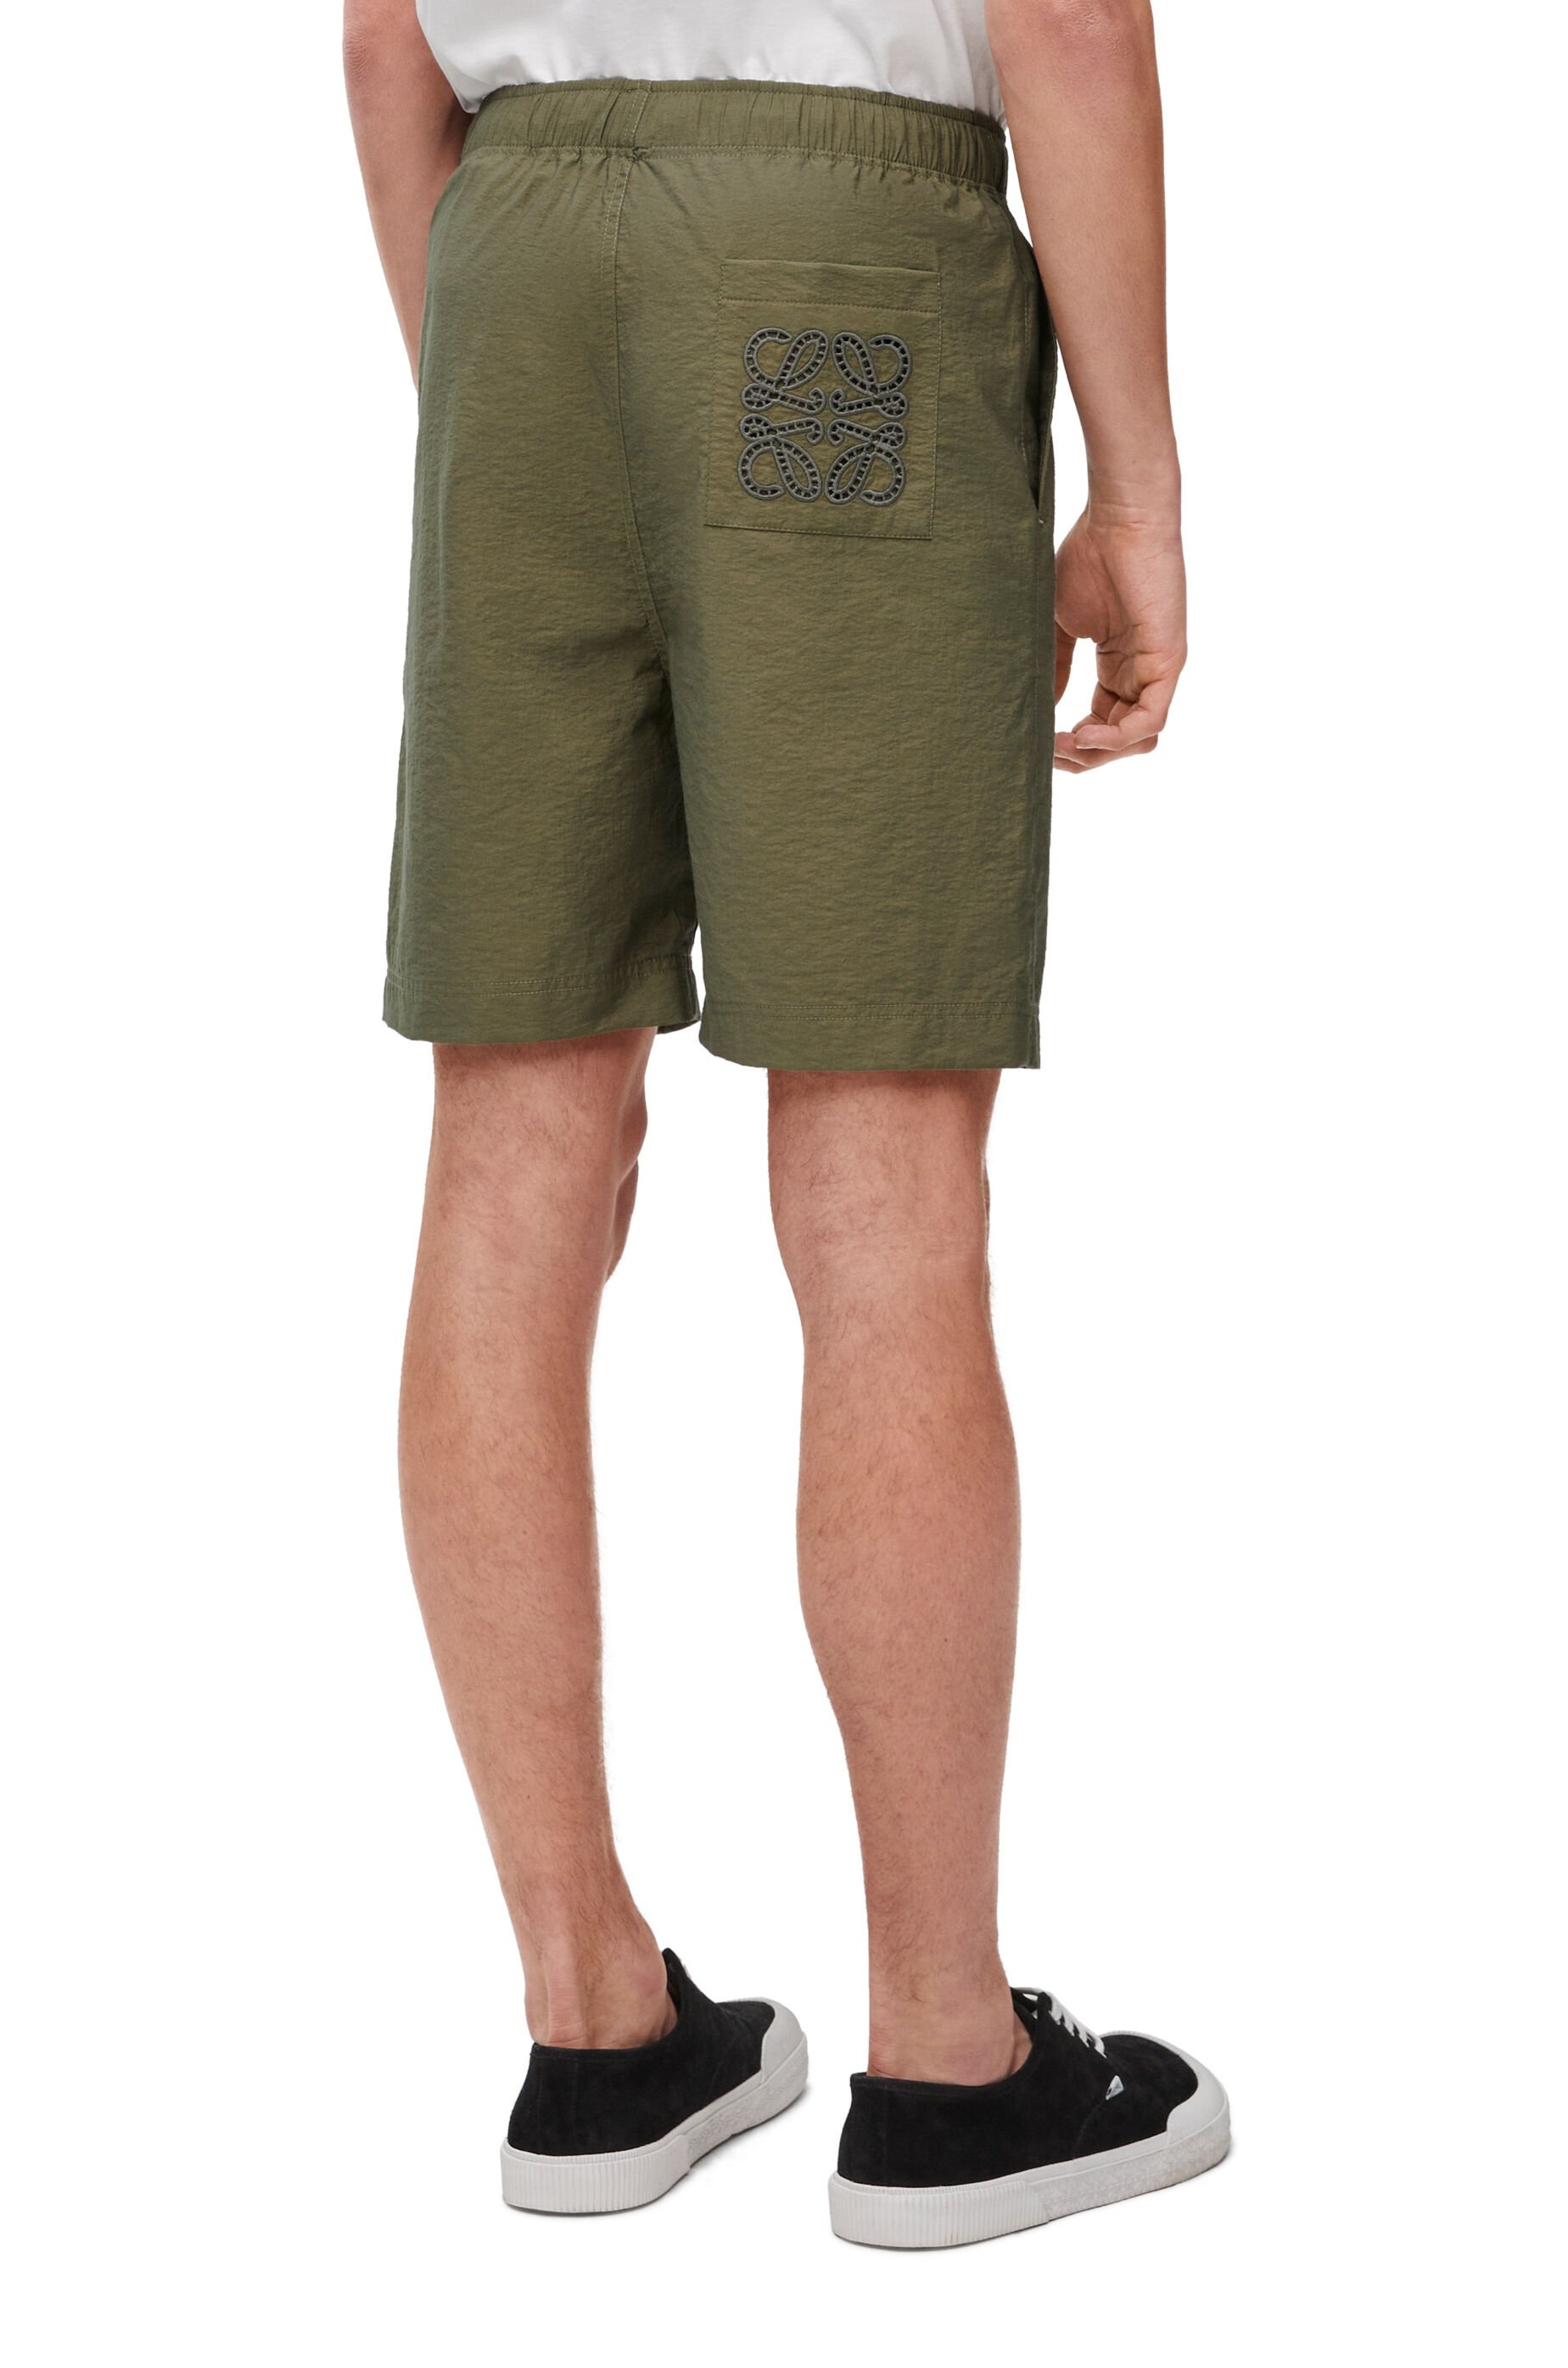 Shorts in cotton blend - 4